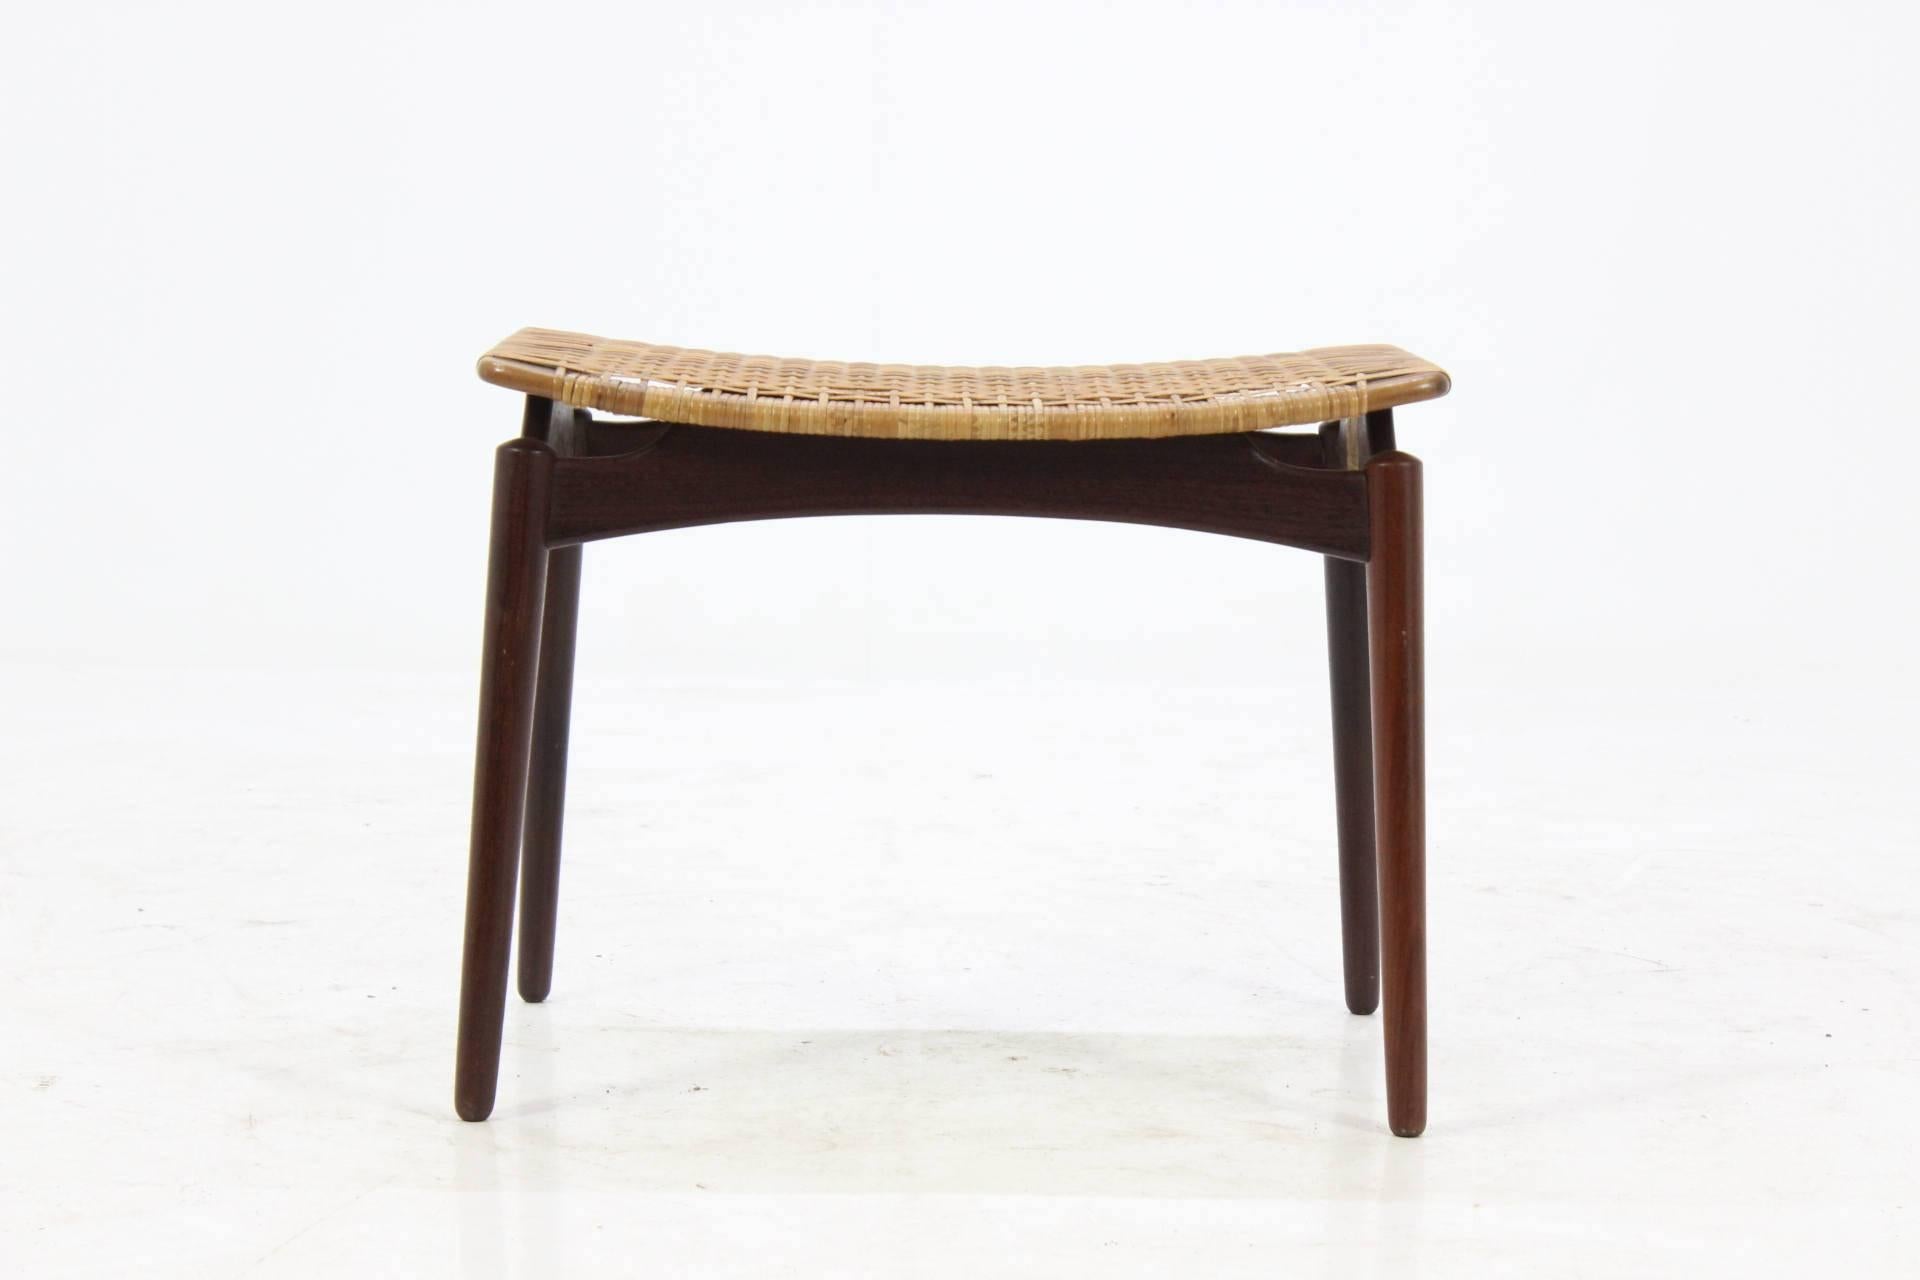 Very nice shaped Danish teak stool with string seat. The seat is sturdy and comfortable.